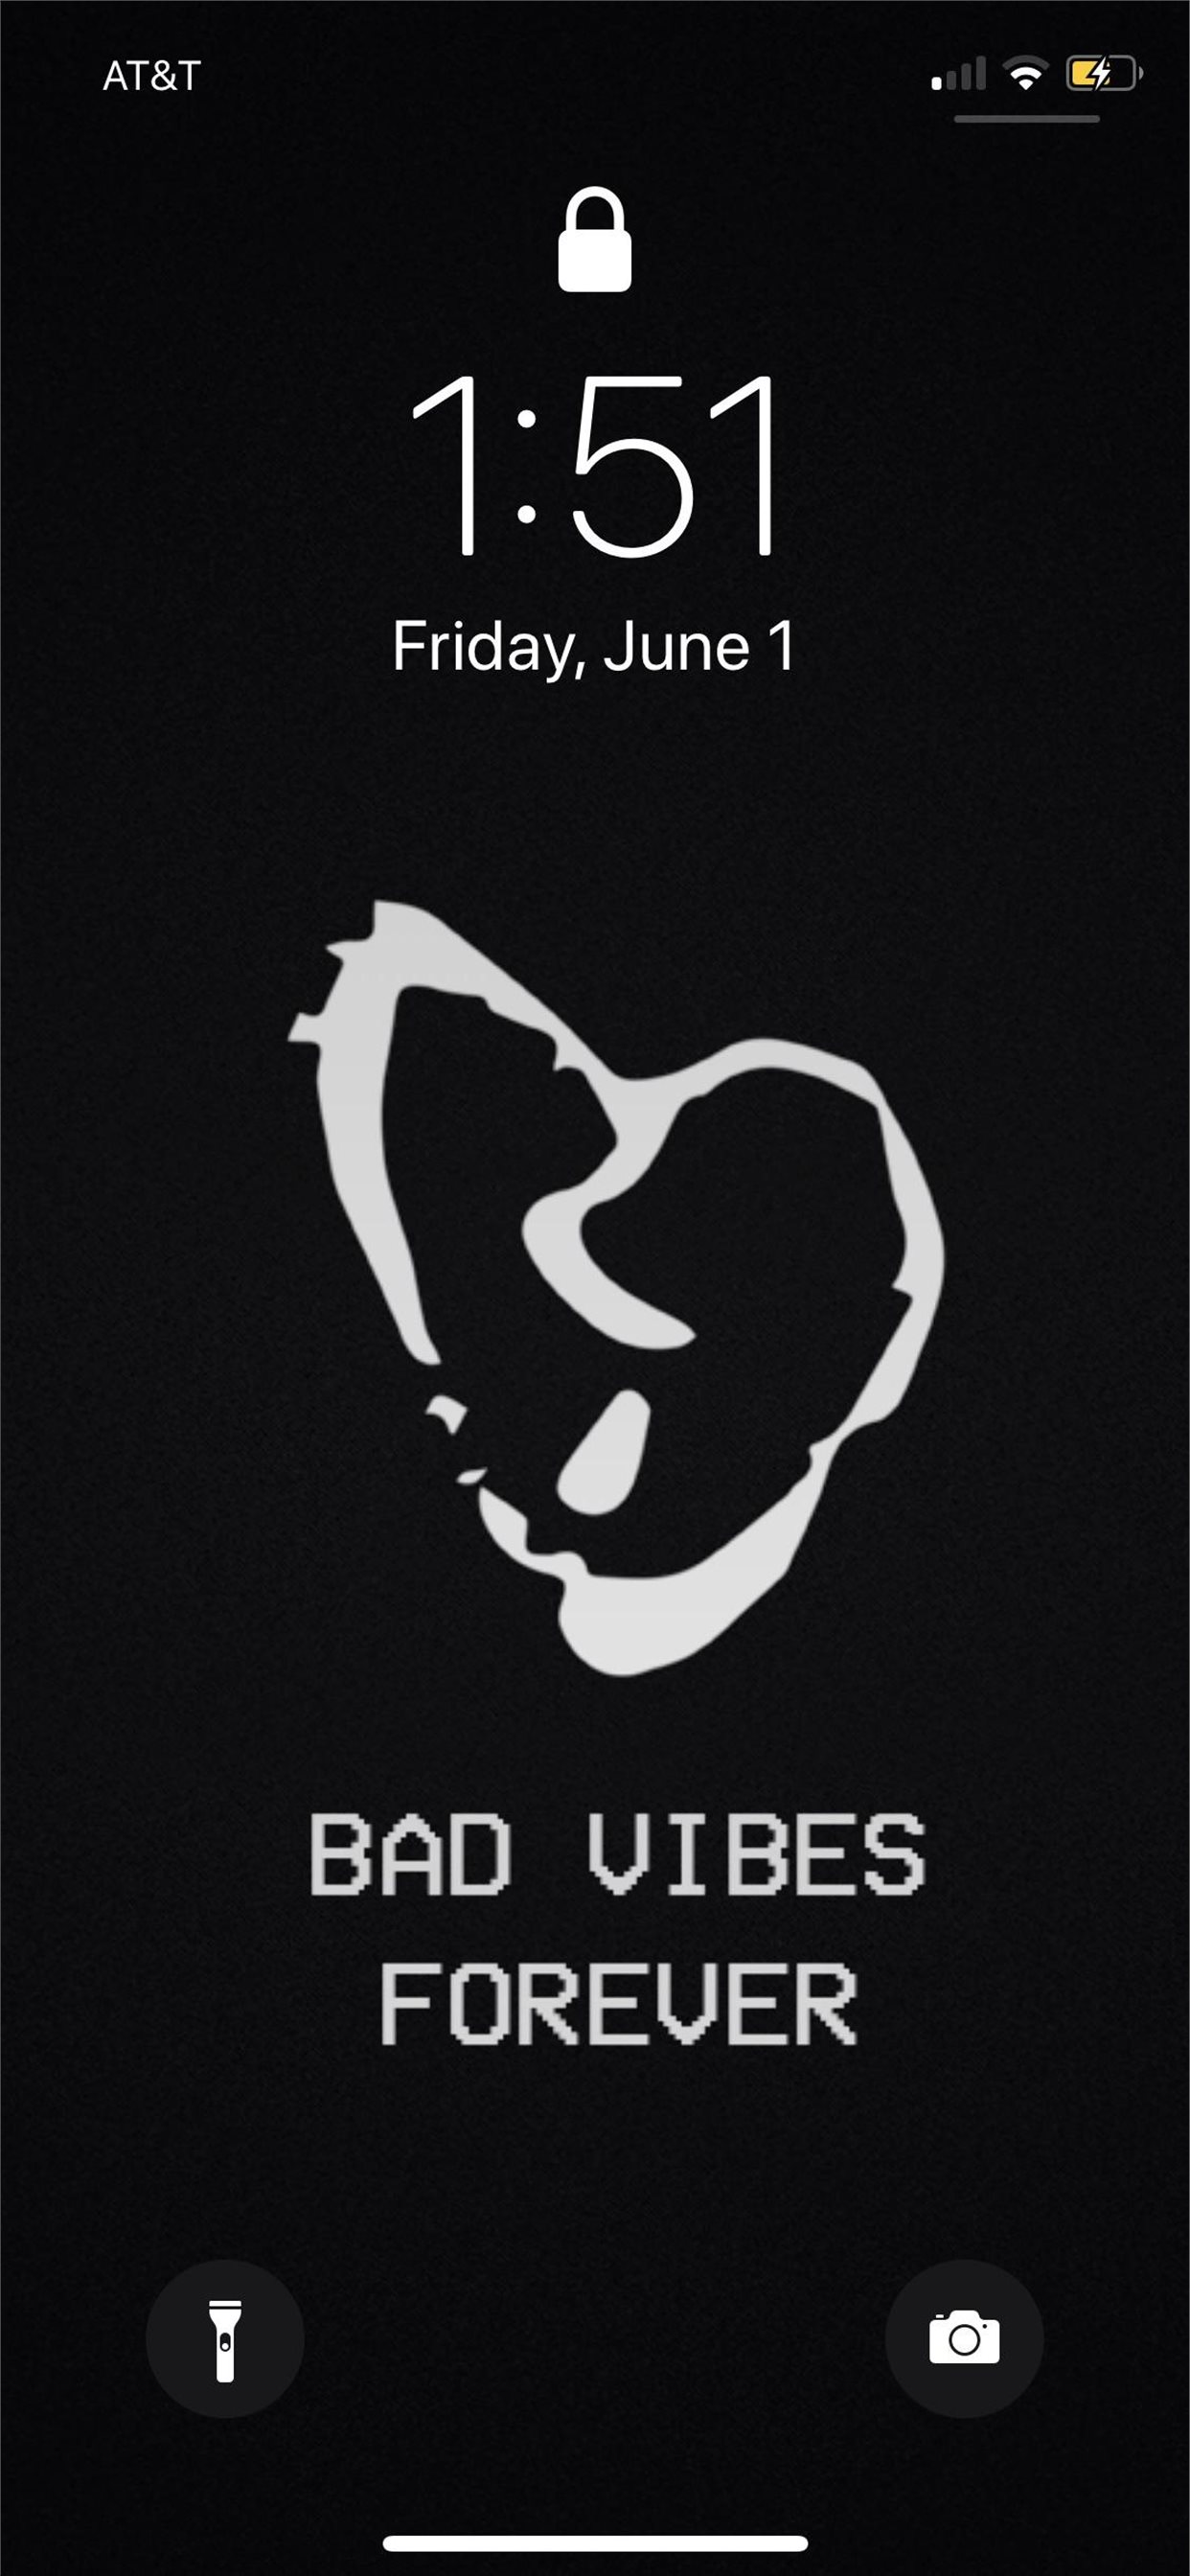 Vibes forever. Bad Vibes Forever. XXXTENTACION iphone. XXXTENTACION Bad. XXXTENTACION Bad Vibes.